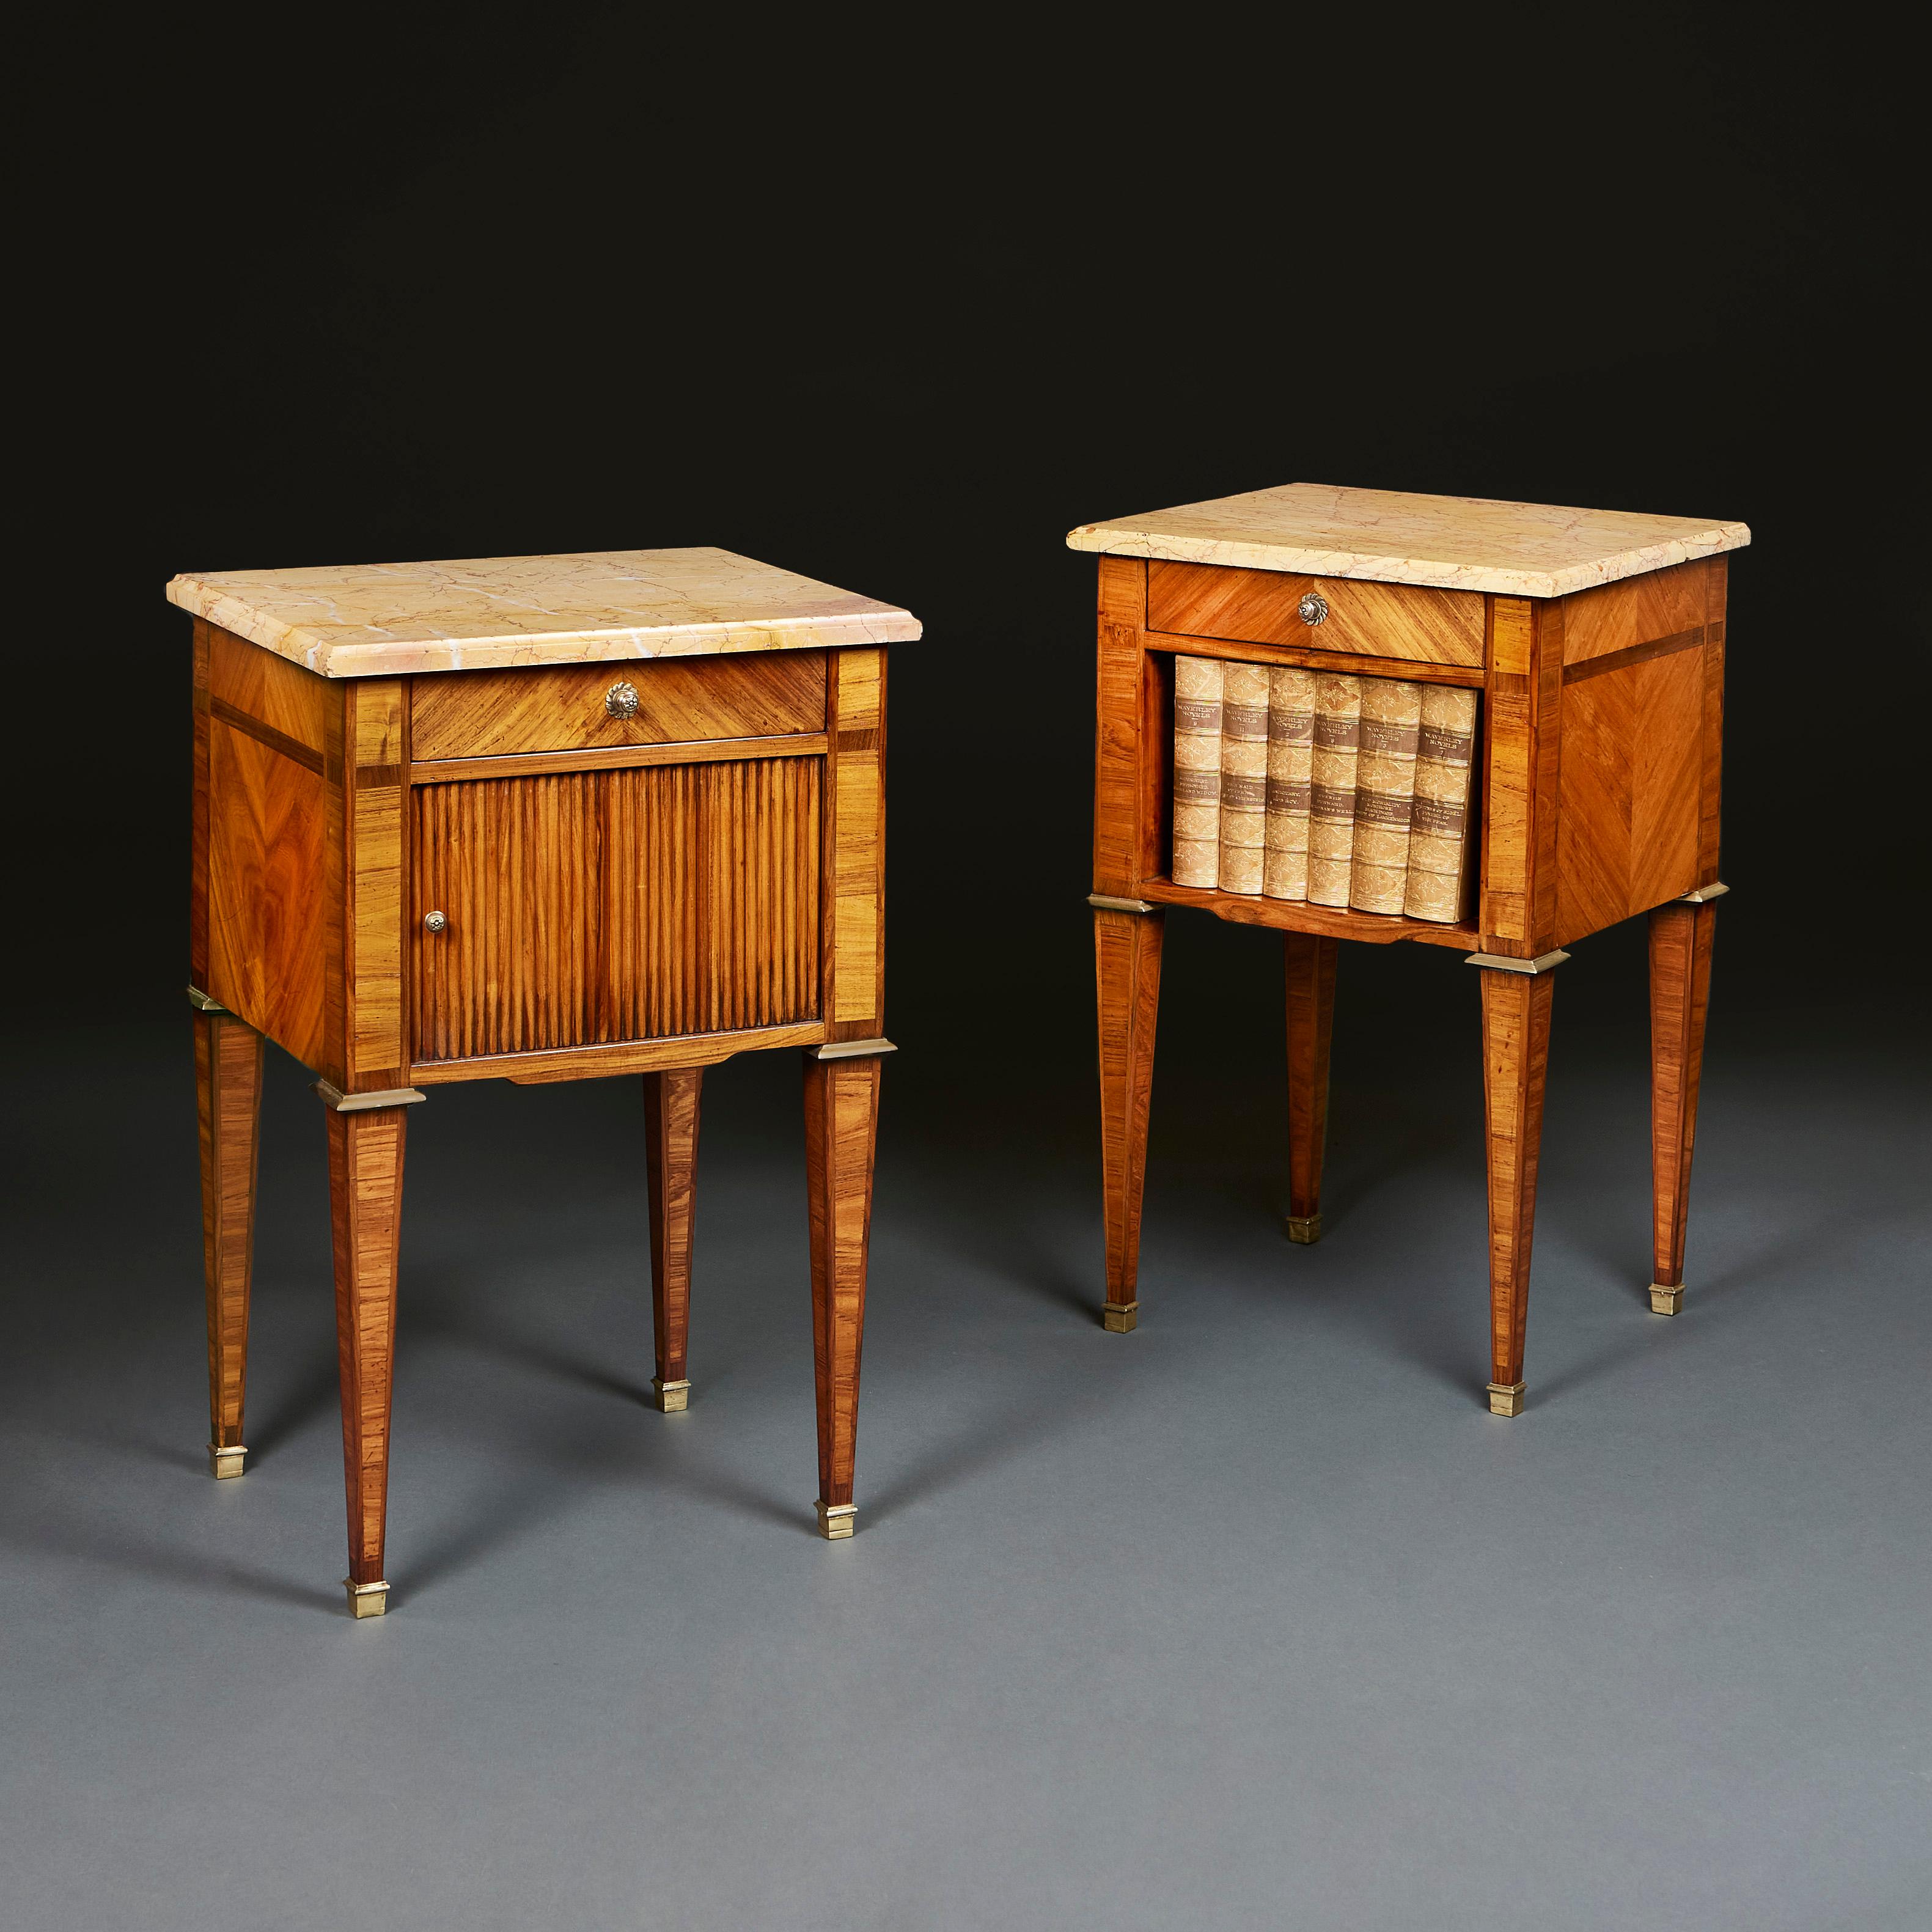 France, circa 1790

A pair of late eighteenth century kingwood bedside cabinets, one with sliding tambour front, the other with an open aperture. With breche d’alep beveled marble tops, all supported on tapering legs terminating in brass topie